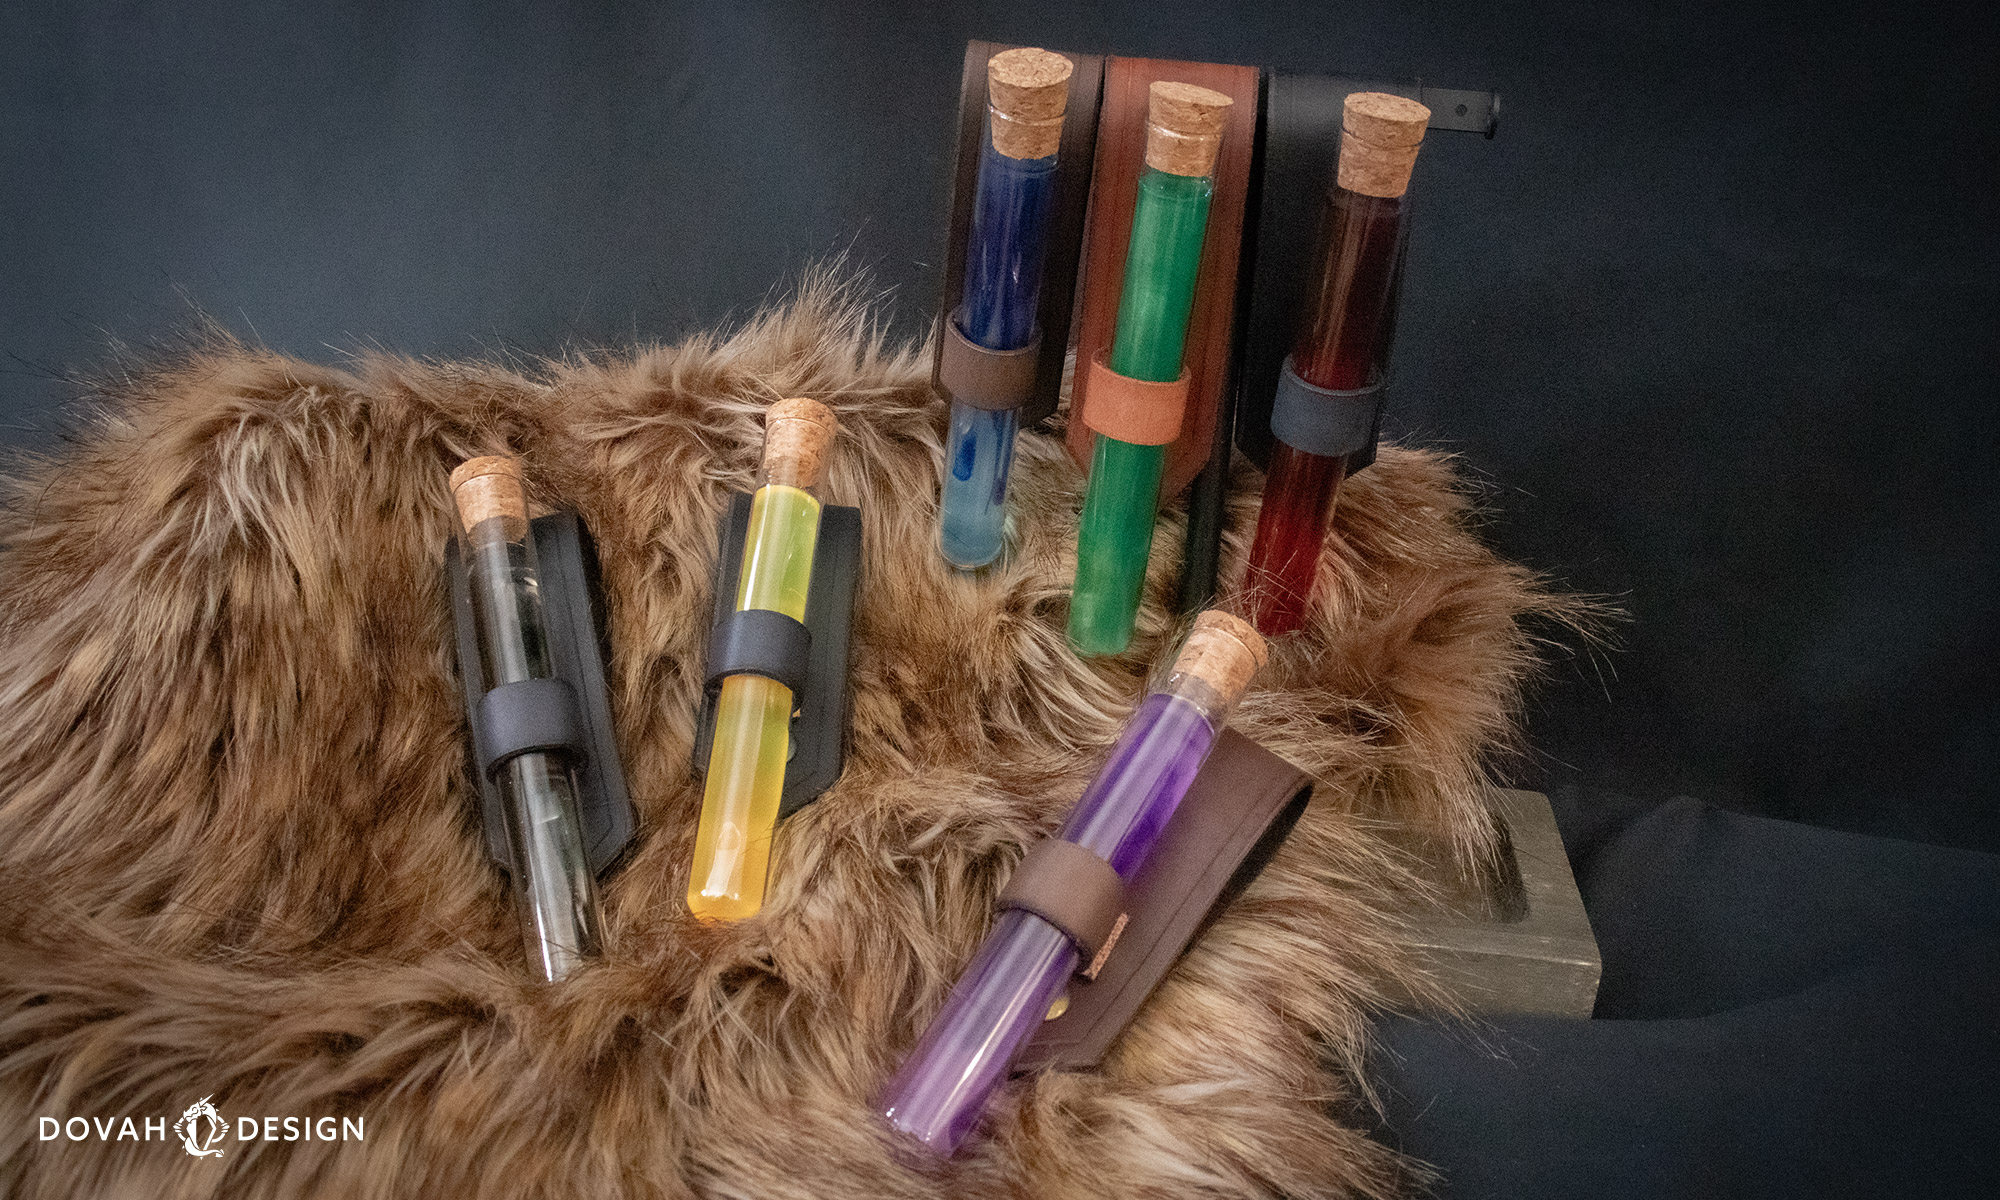 Six costume potion holsters in various colors displayed on brown fur and a black background. Ren fair potion costume accessory.